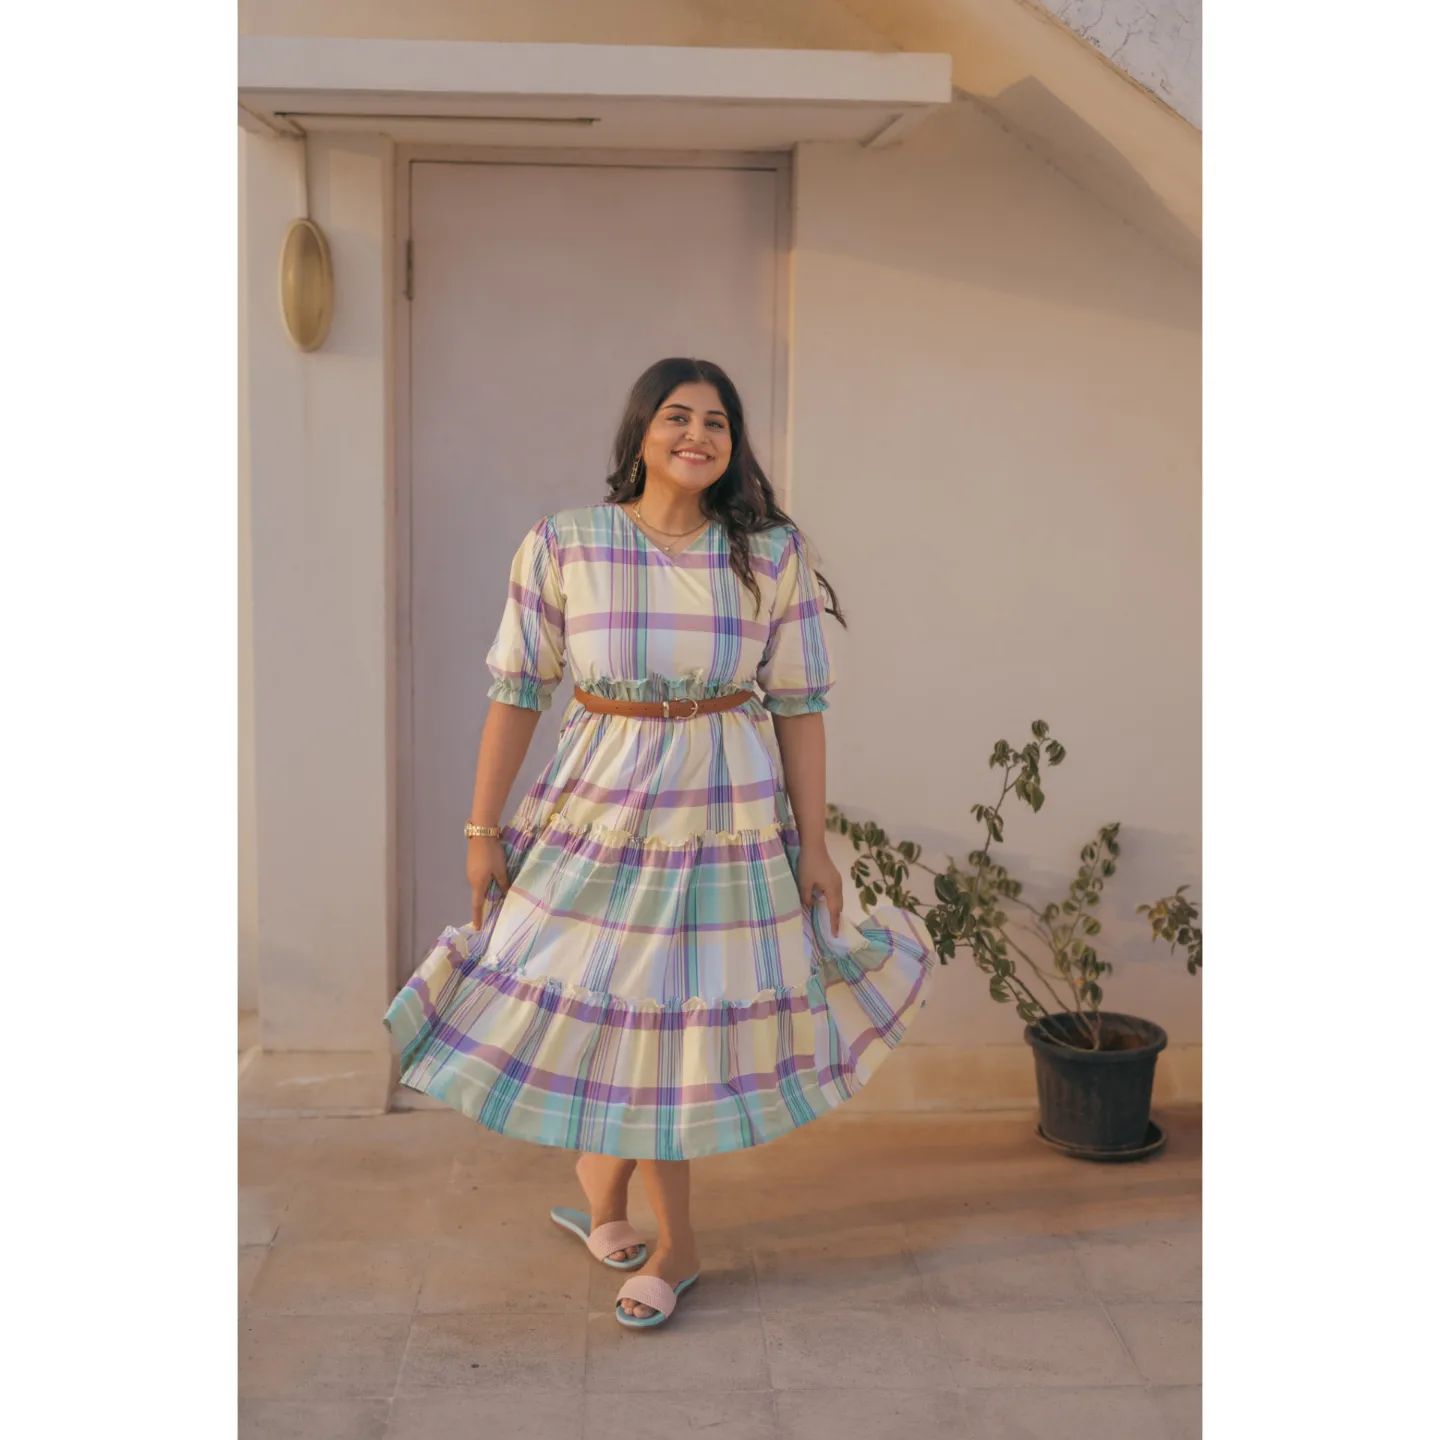 Manjima mohan hot gown photos posted on instagram